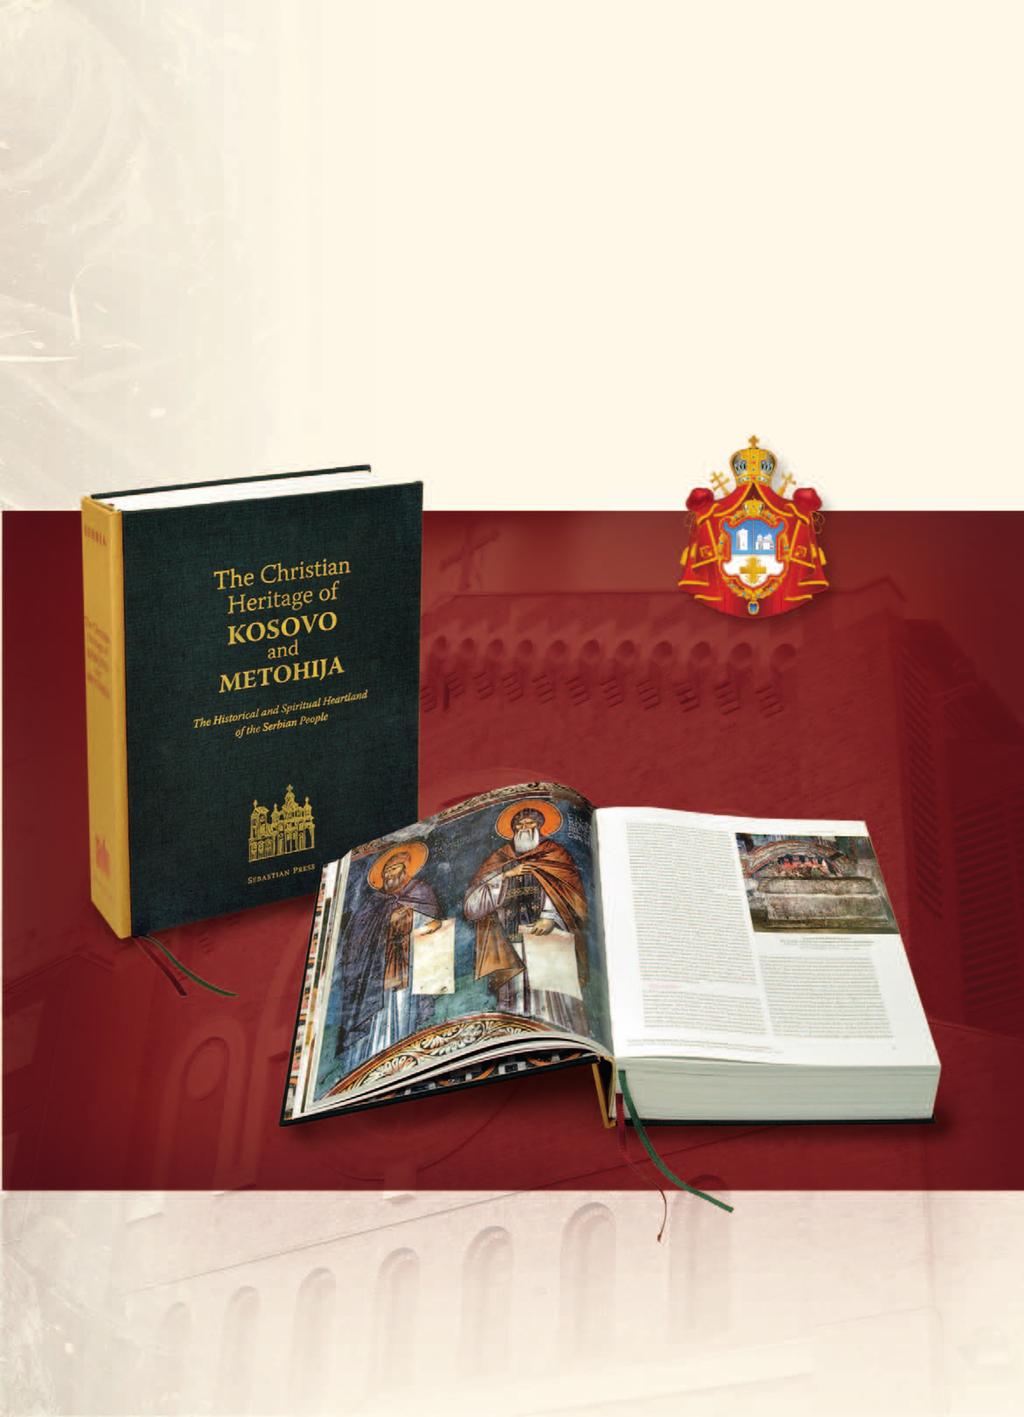 The Christian Heritage of Kosovo and Metohija The Historical and Spiritual Heartland of the Serbian People This book on Serbia s Christian Heritage in Kosovo and Metohija, its heartland in medieval